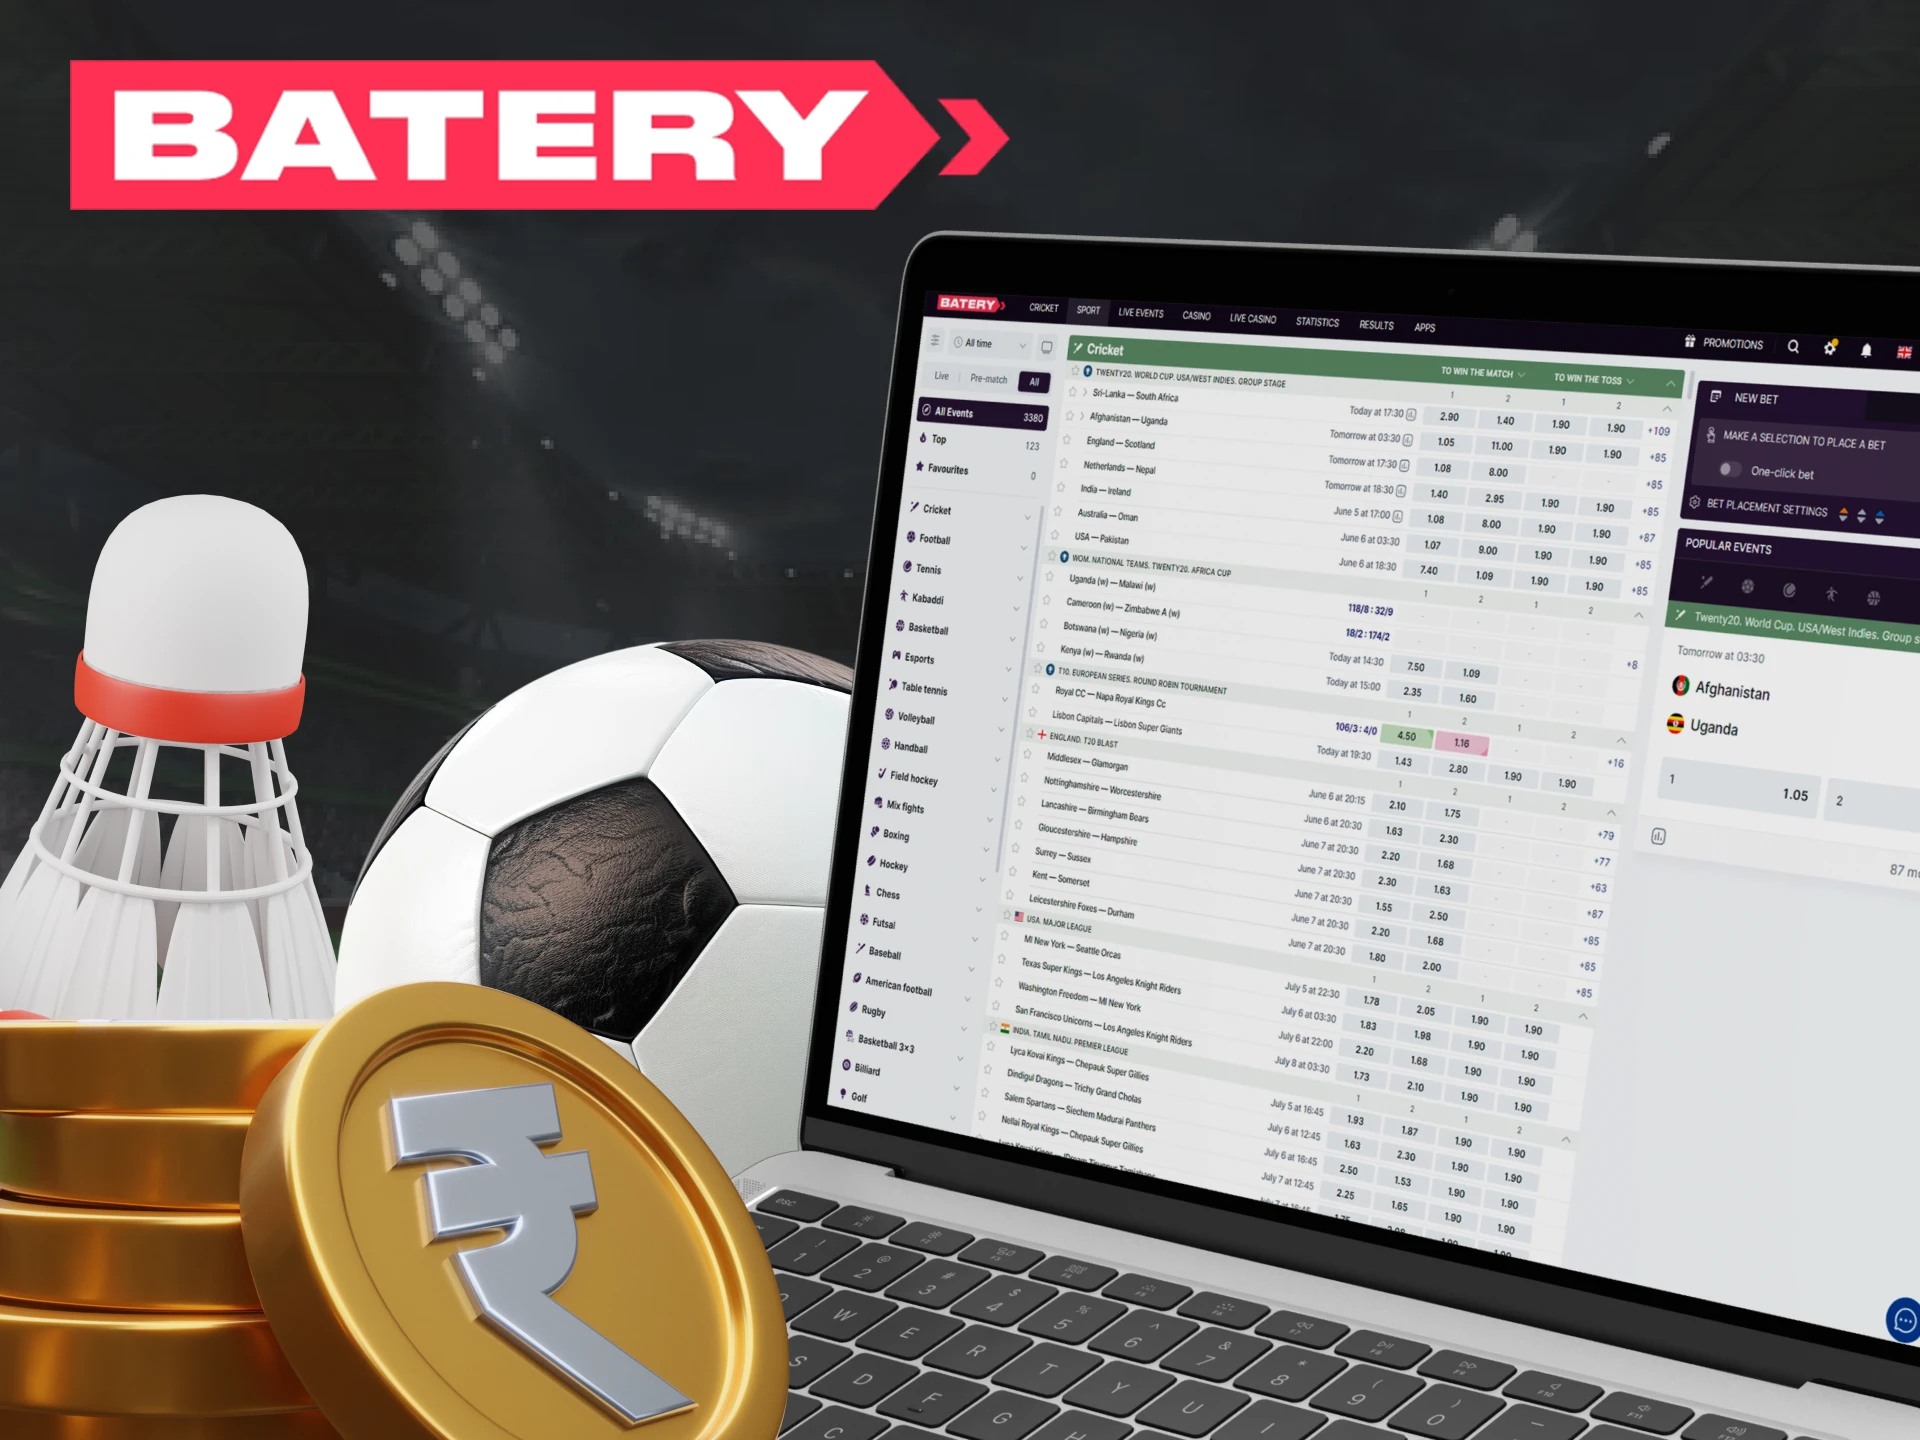 Bet on sports by creating a Batery account and receiving the sports welcome bonus.